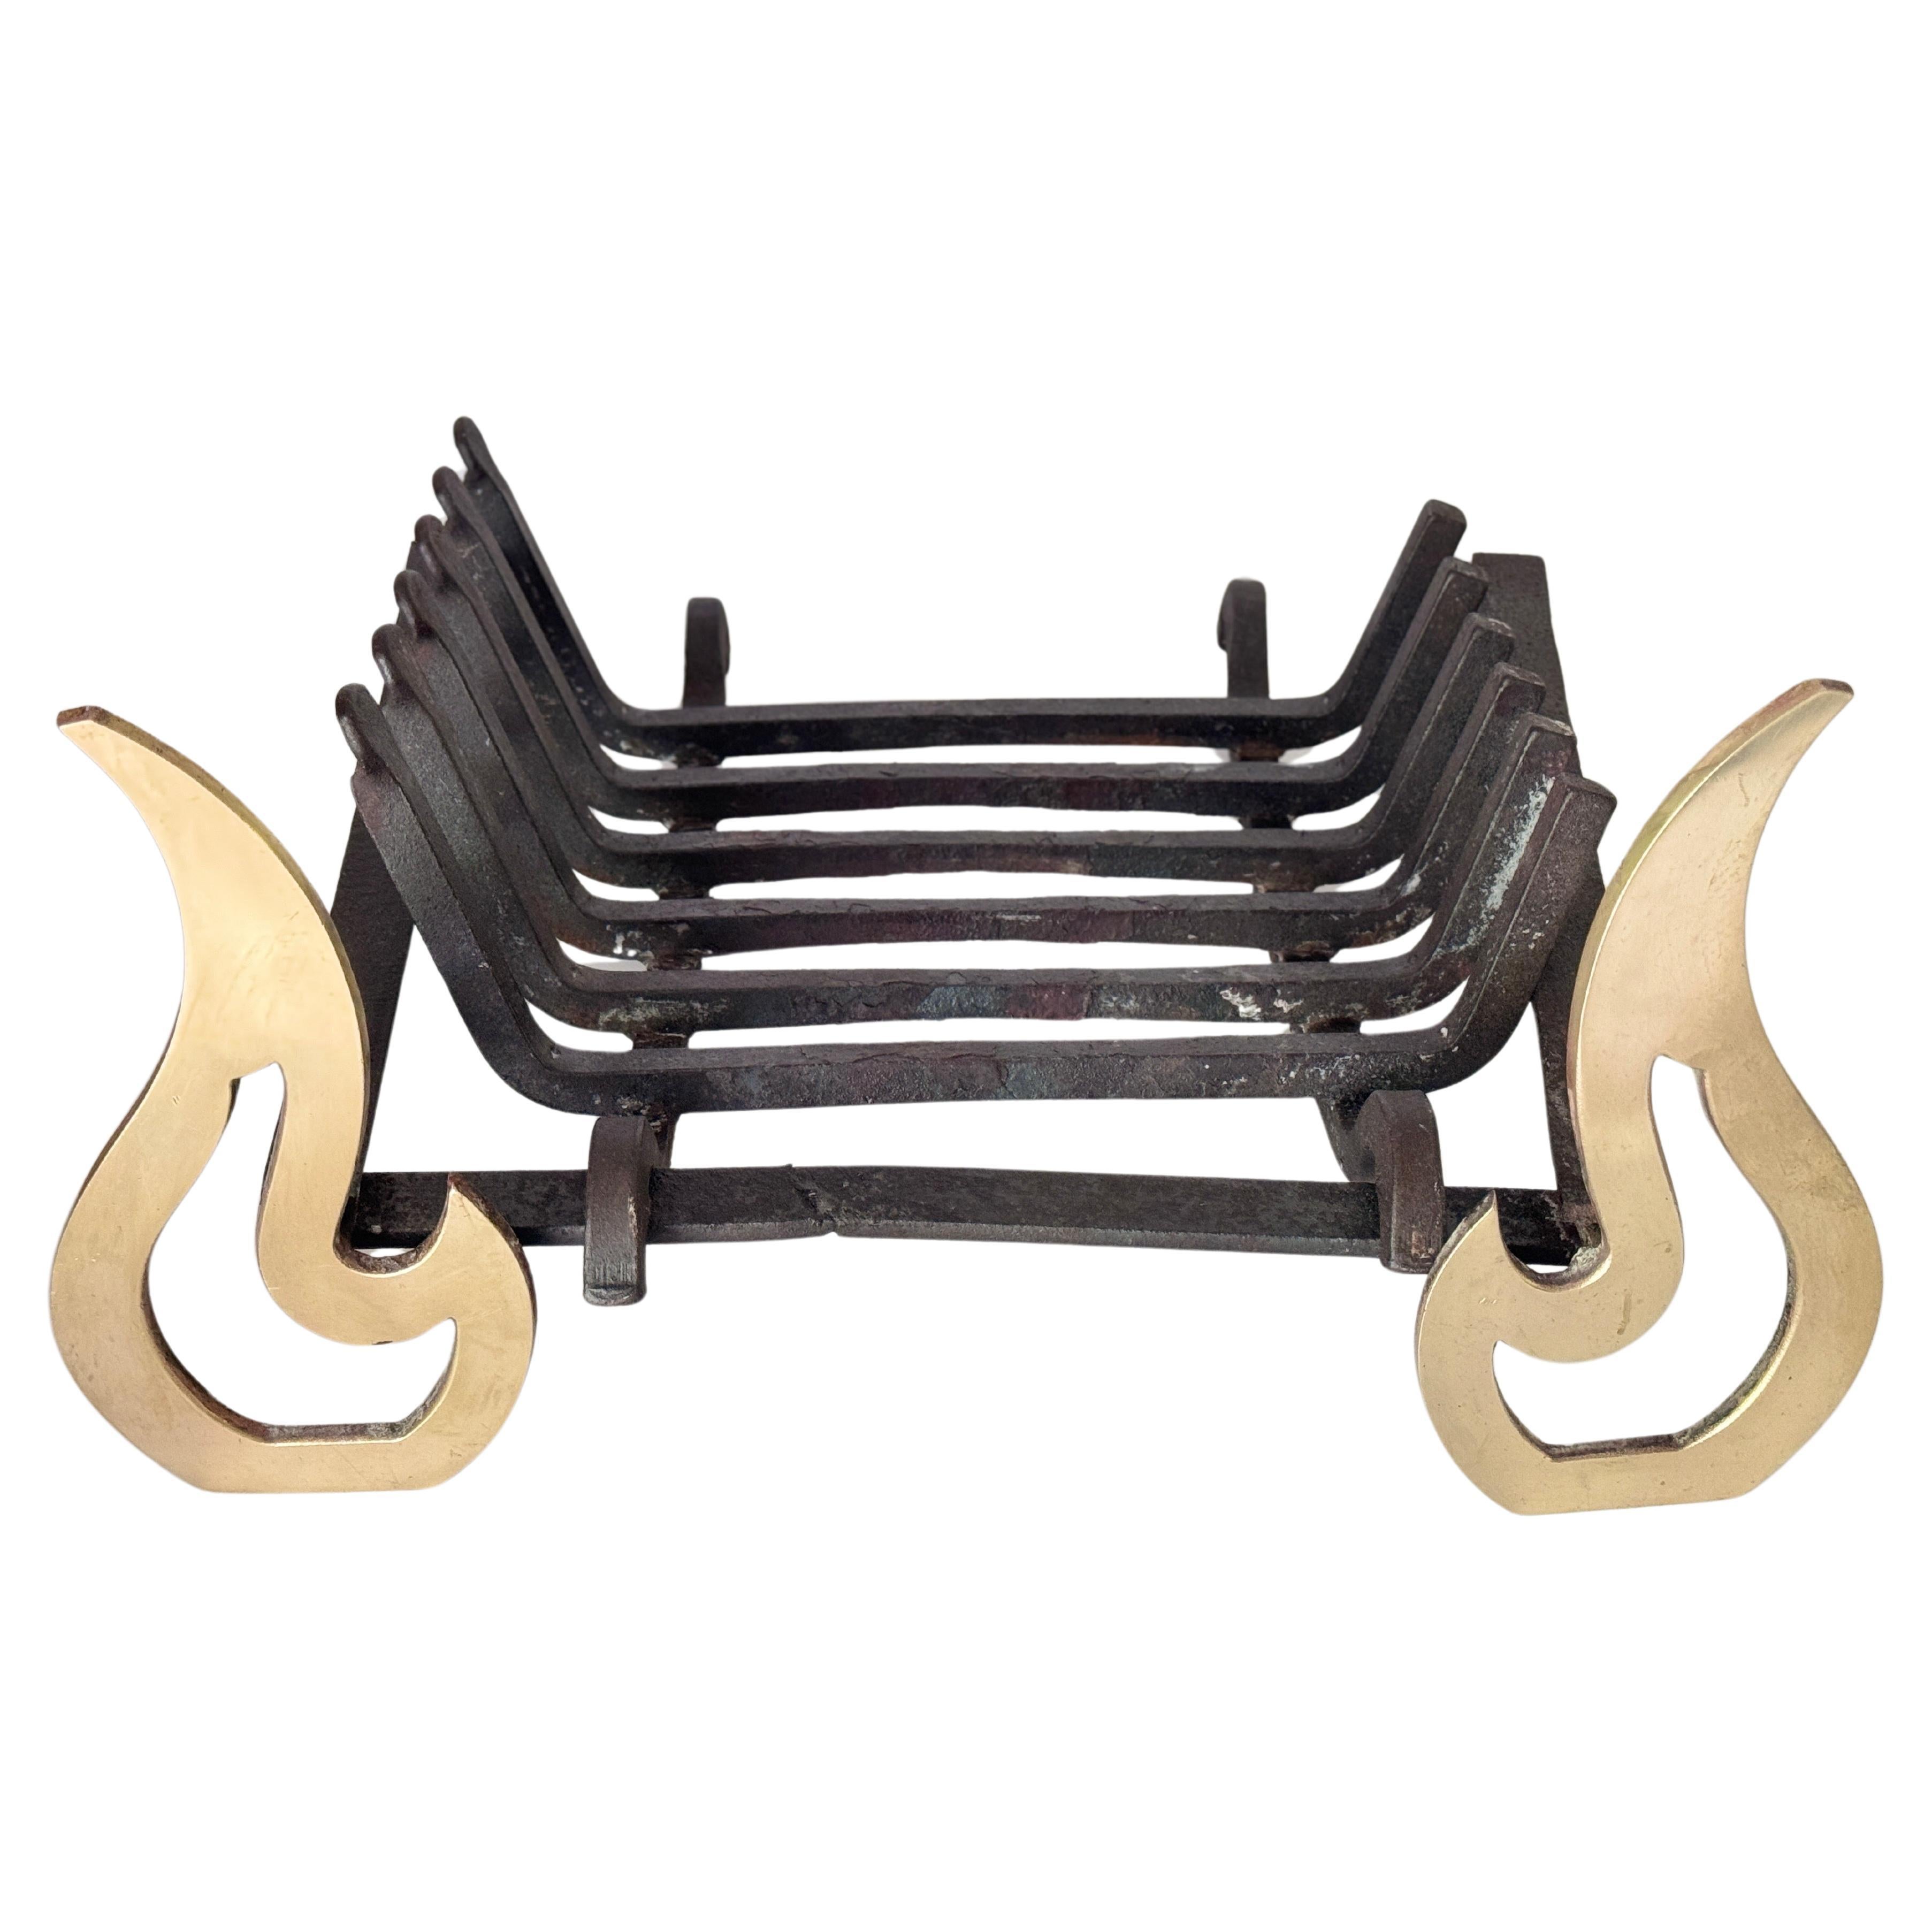 Art Deco Modernist Wrought Iron and Brass Fire Andiron For Sale